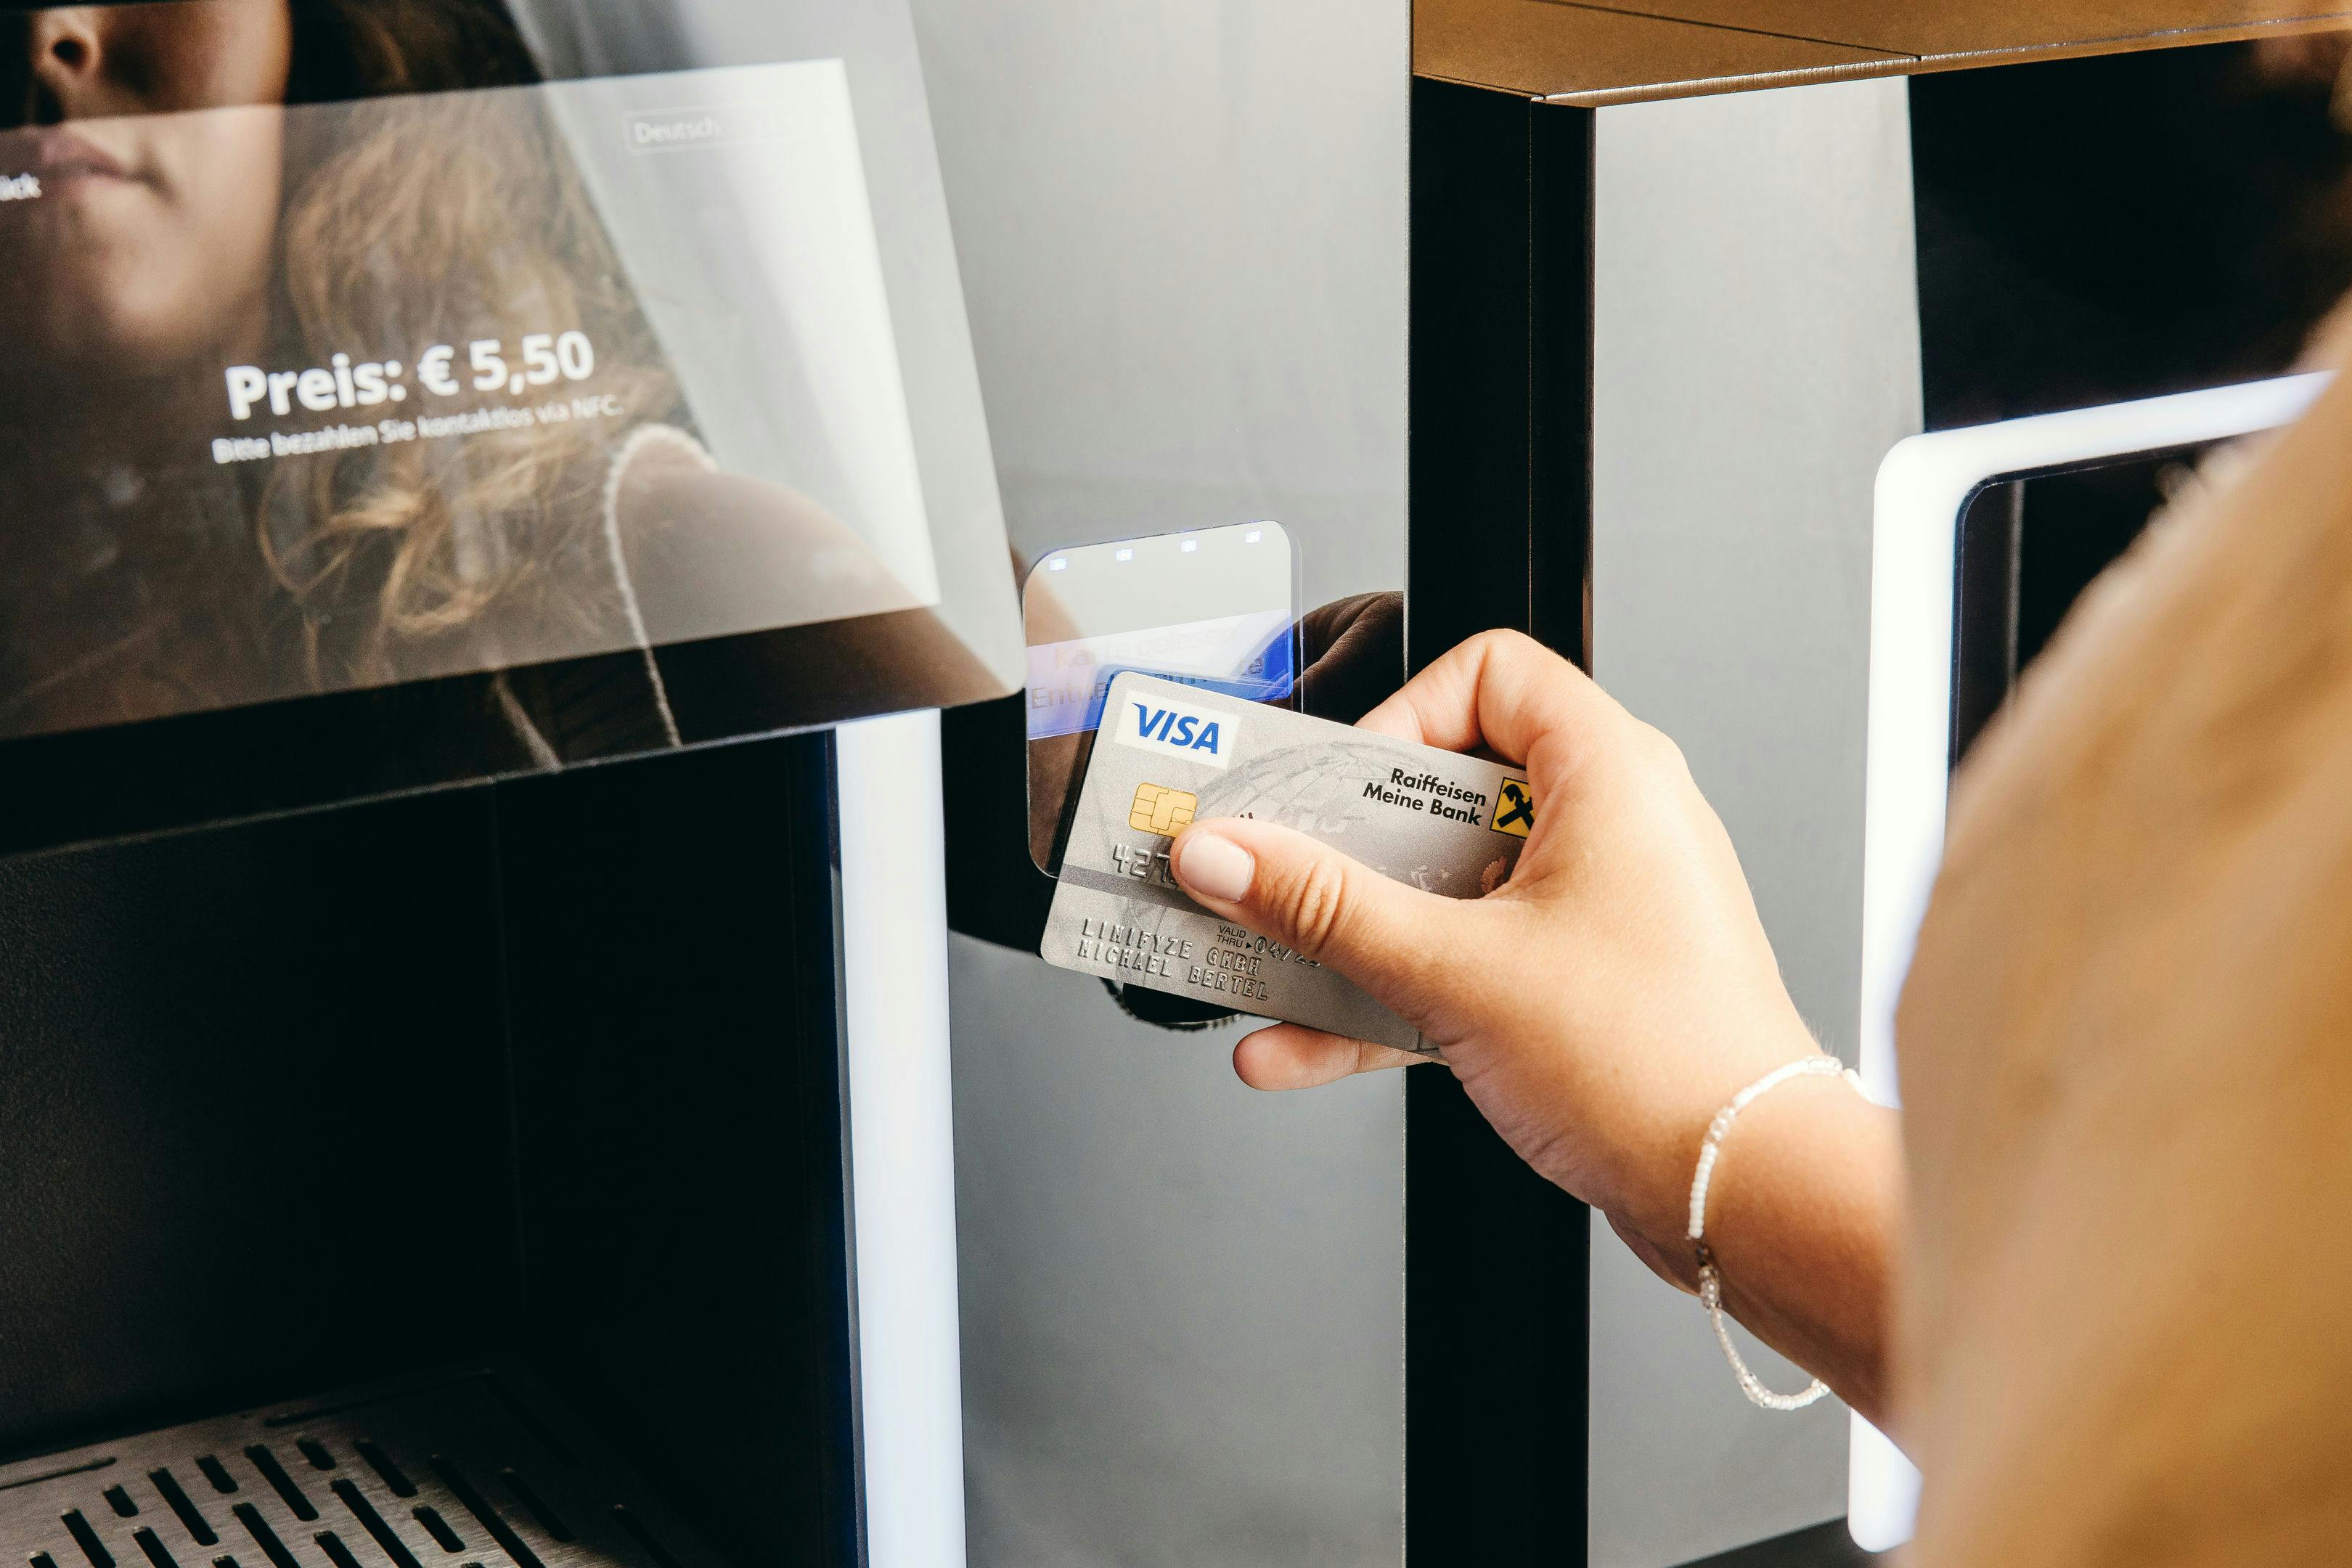 Efficient payment at the Limifyze self-service bar: simple, fast and cost-conscious